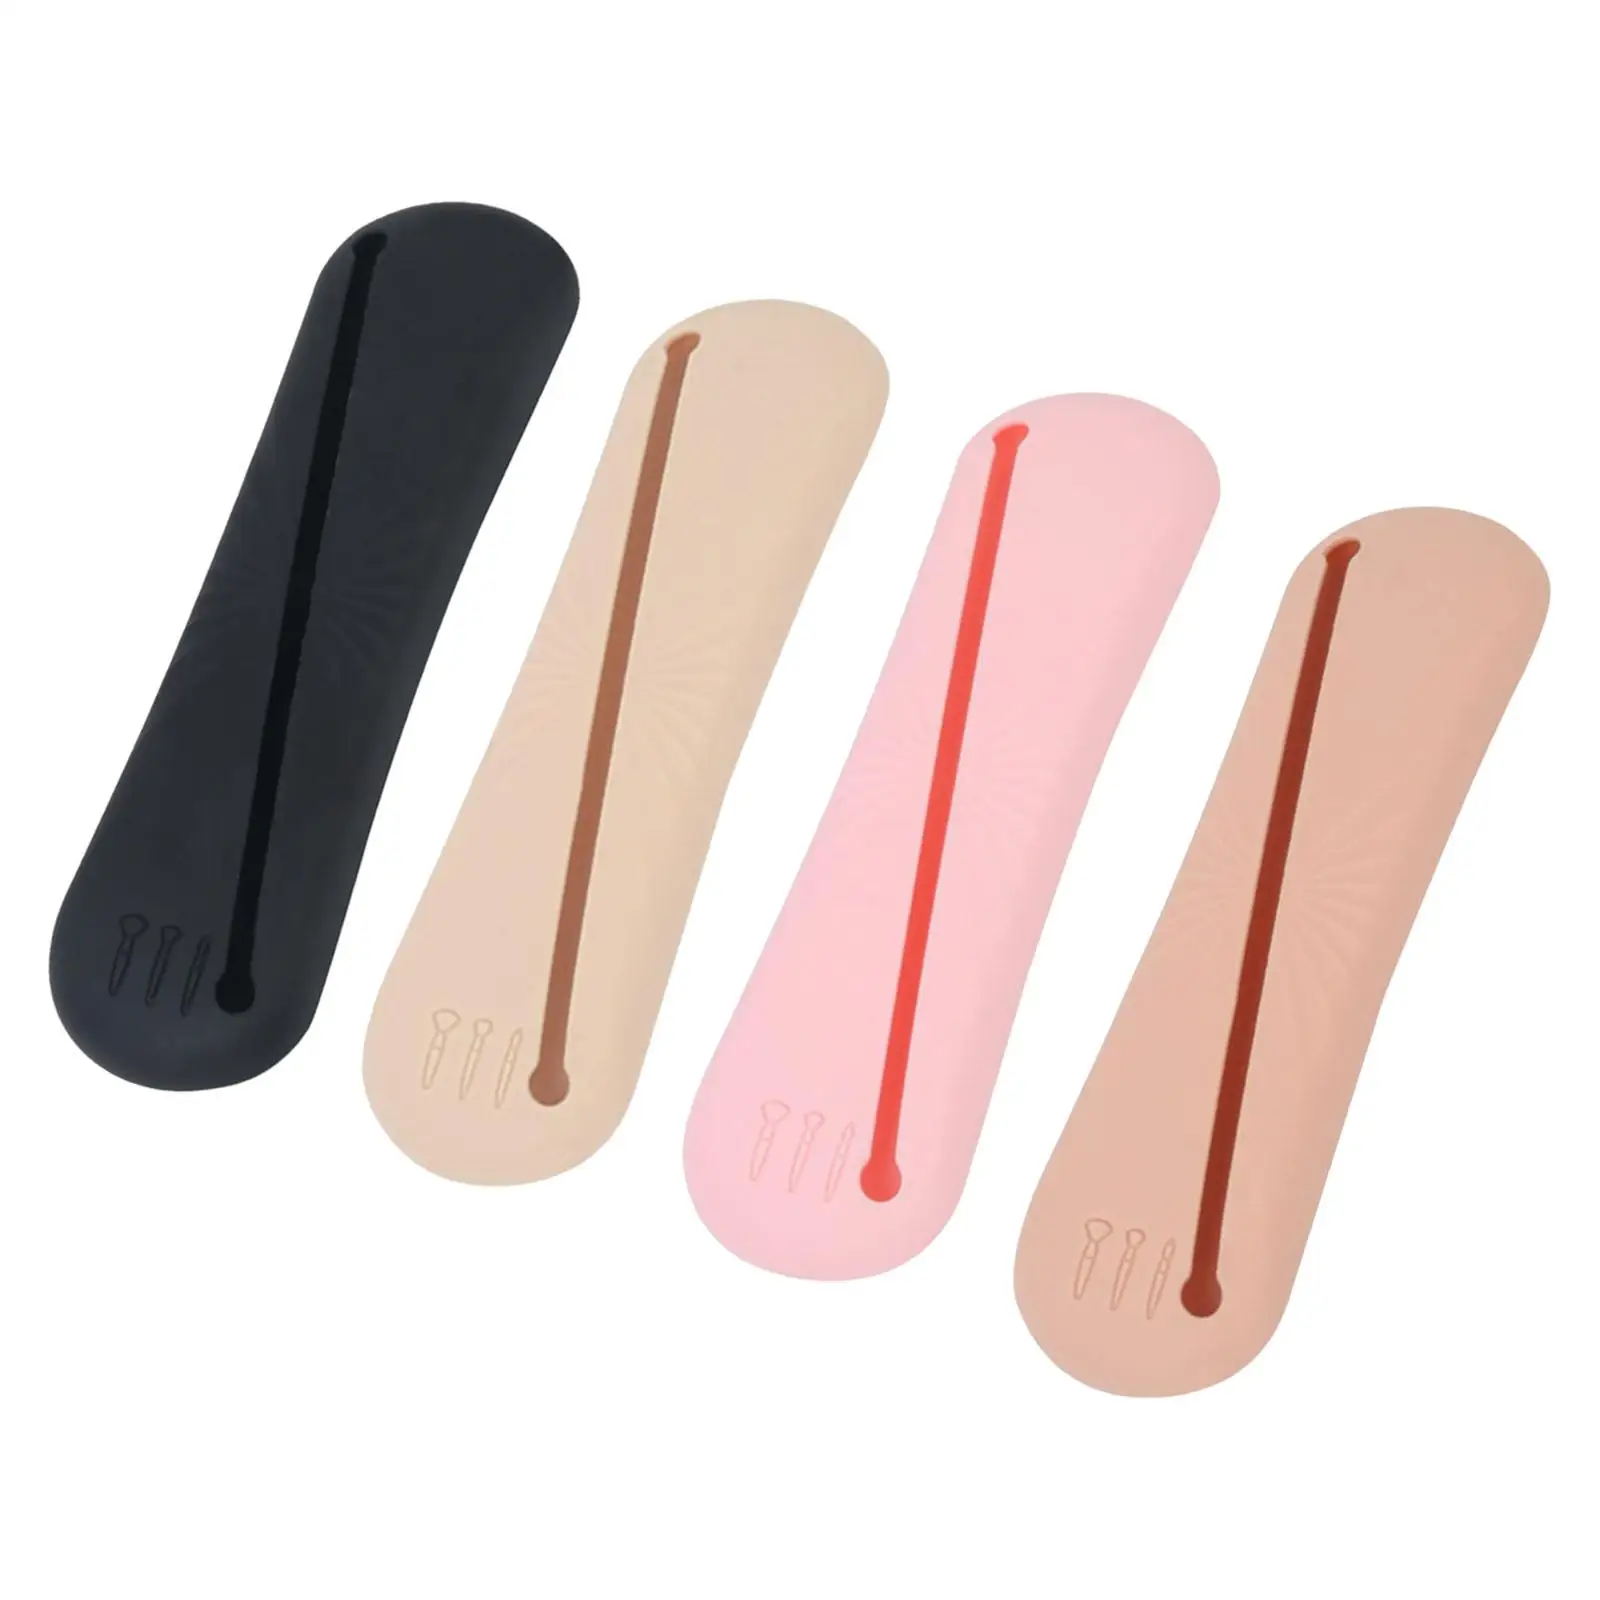 Makeup Brush Holder Cosmetics Holders High Capacity Silicone for